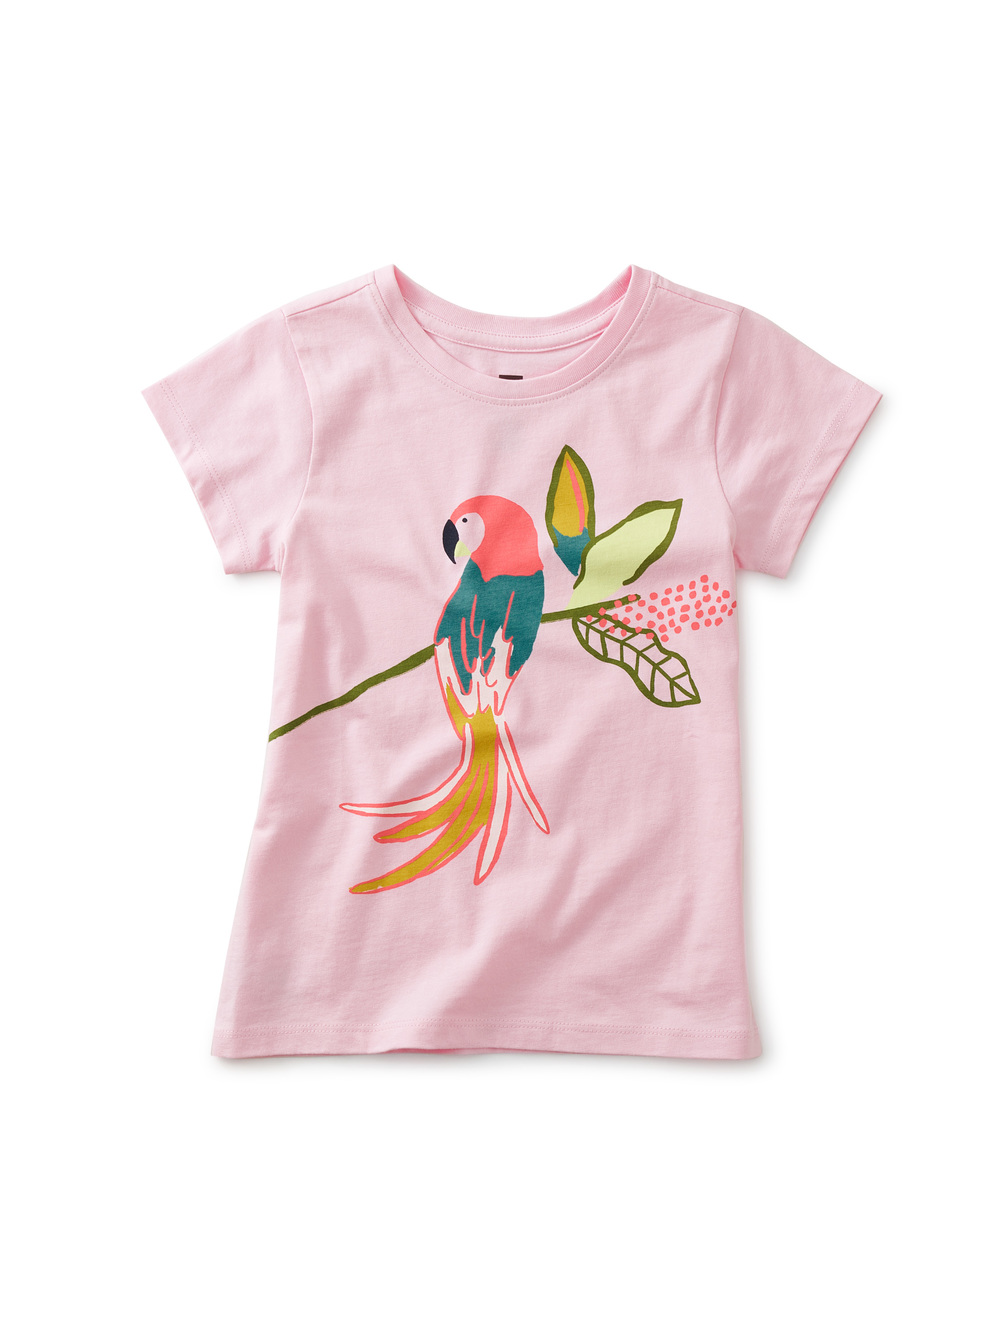 Tropical Macaw Graphic Tee